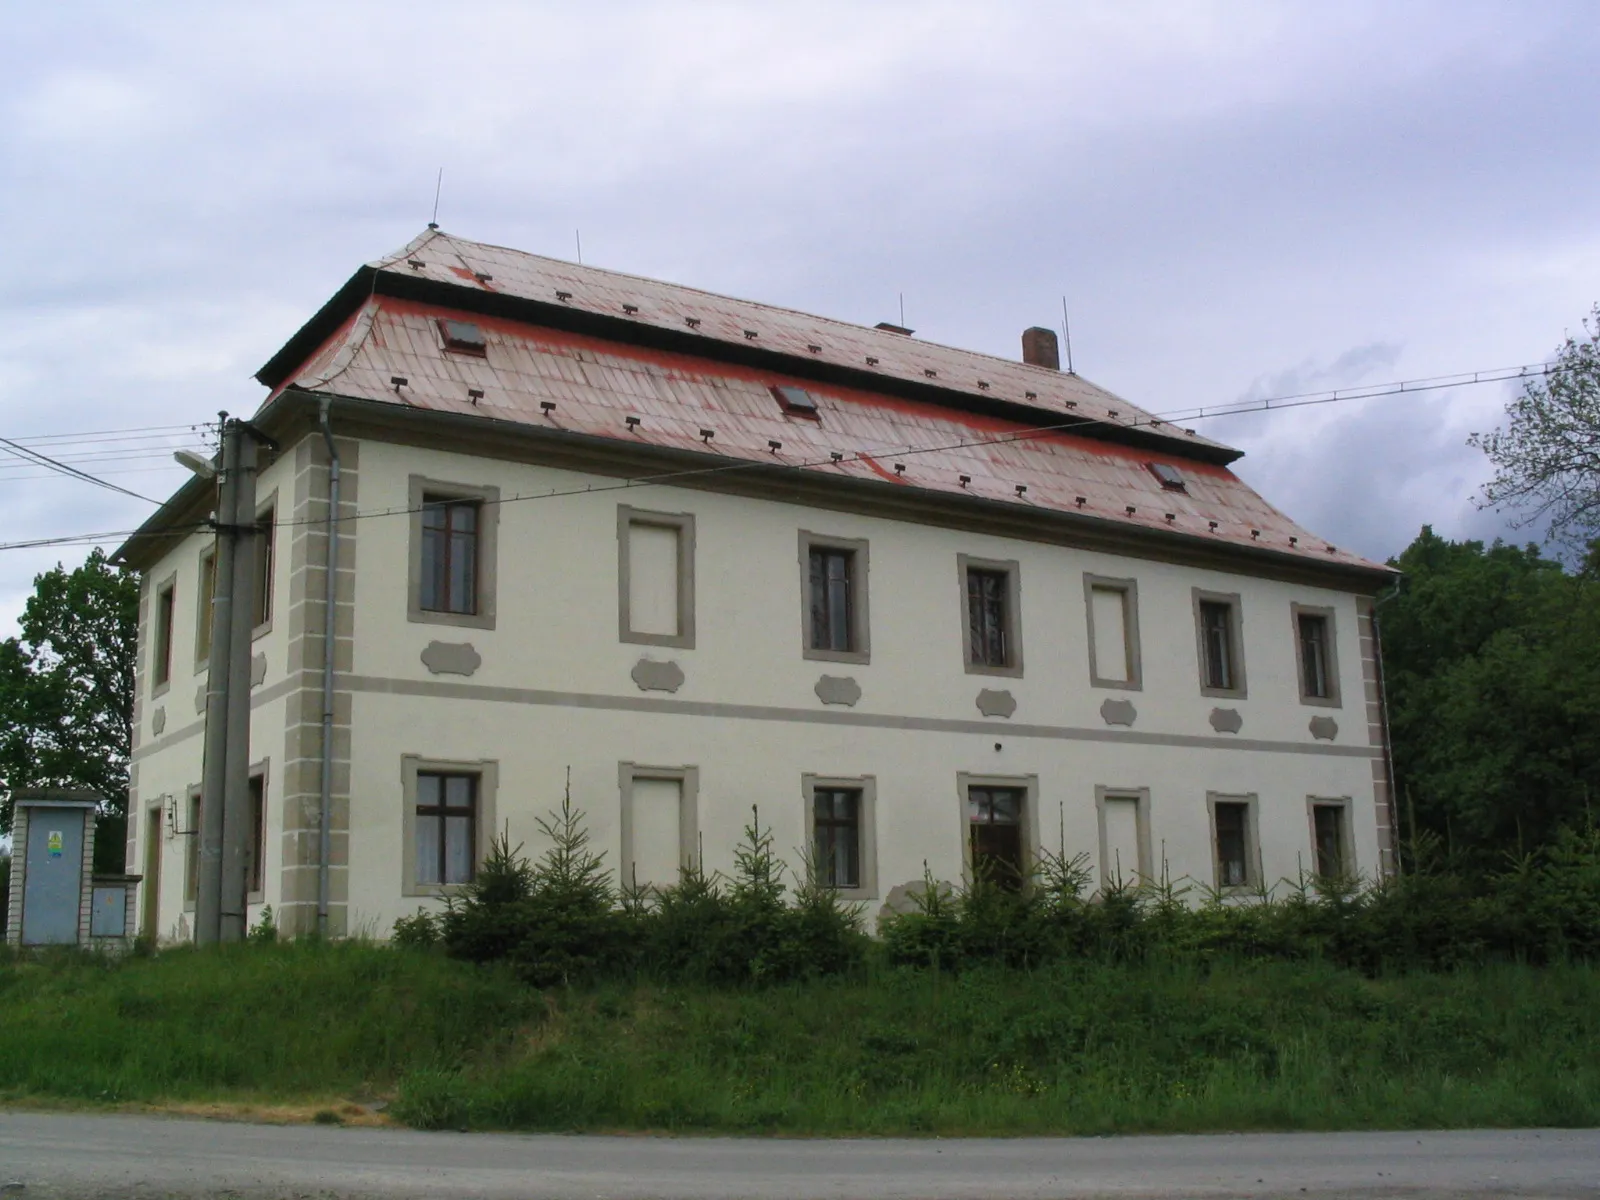 Photo showing: forestry house in Maníkovice, Czech Republic. late baroque, built in 1711 by Nicolas Raimondi.